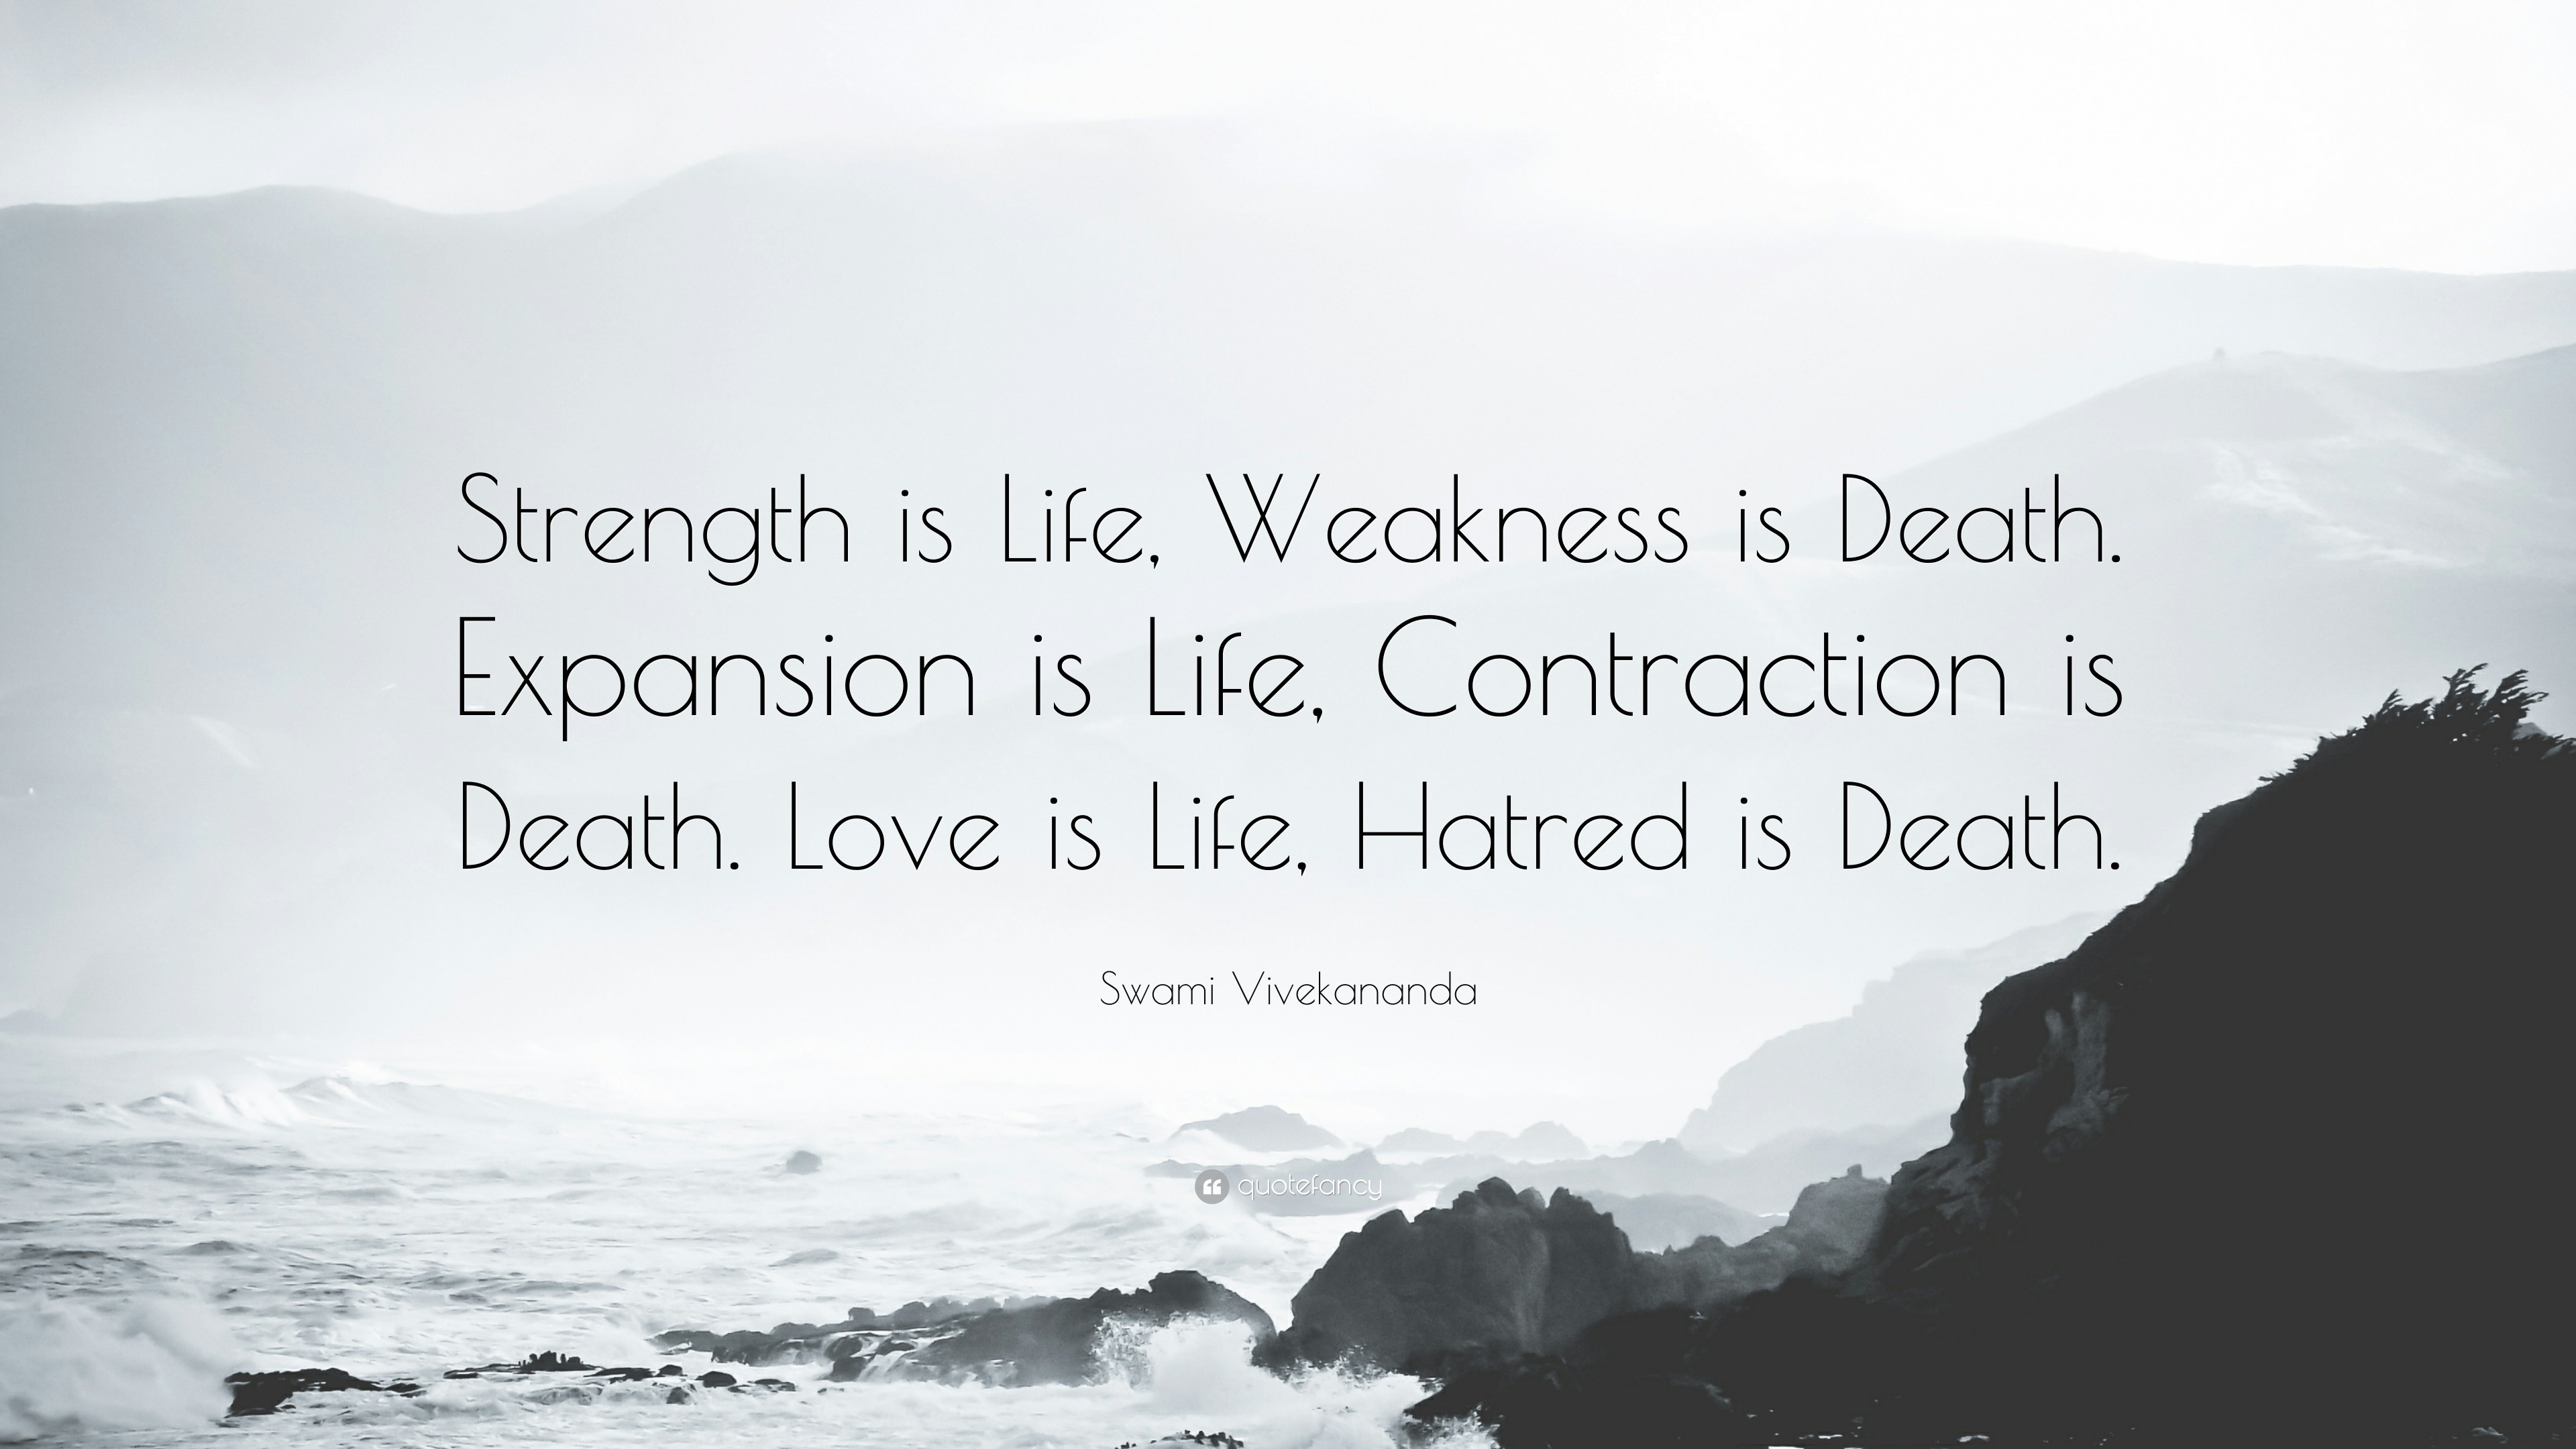 Swami Vivekananda Quote “Strength is Life Weakness is Death Expansion is Life